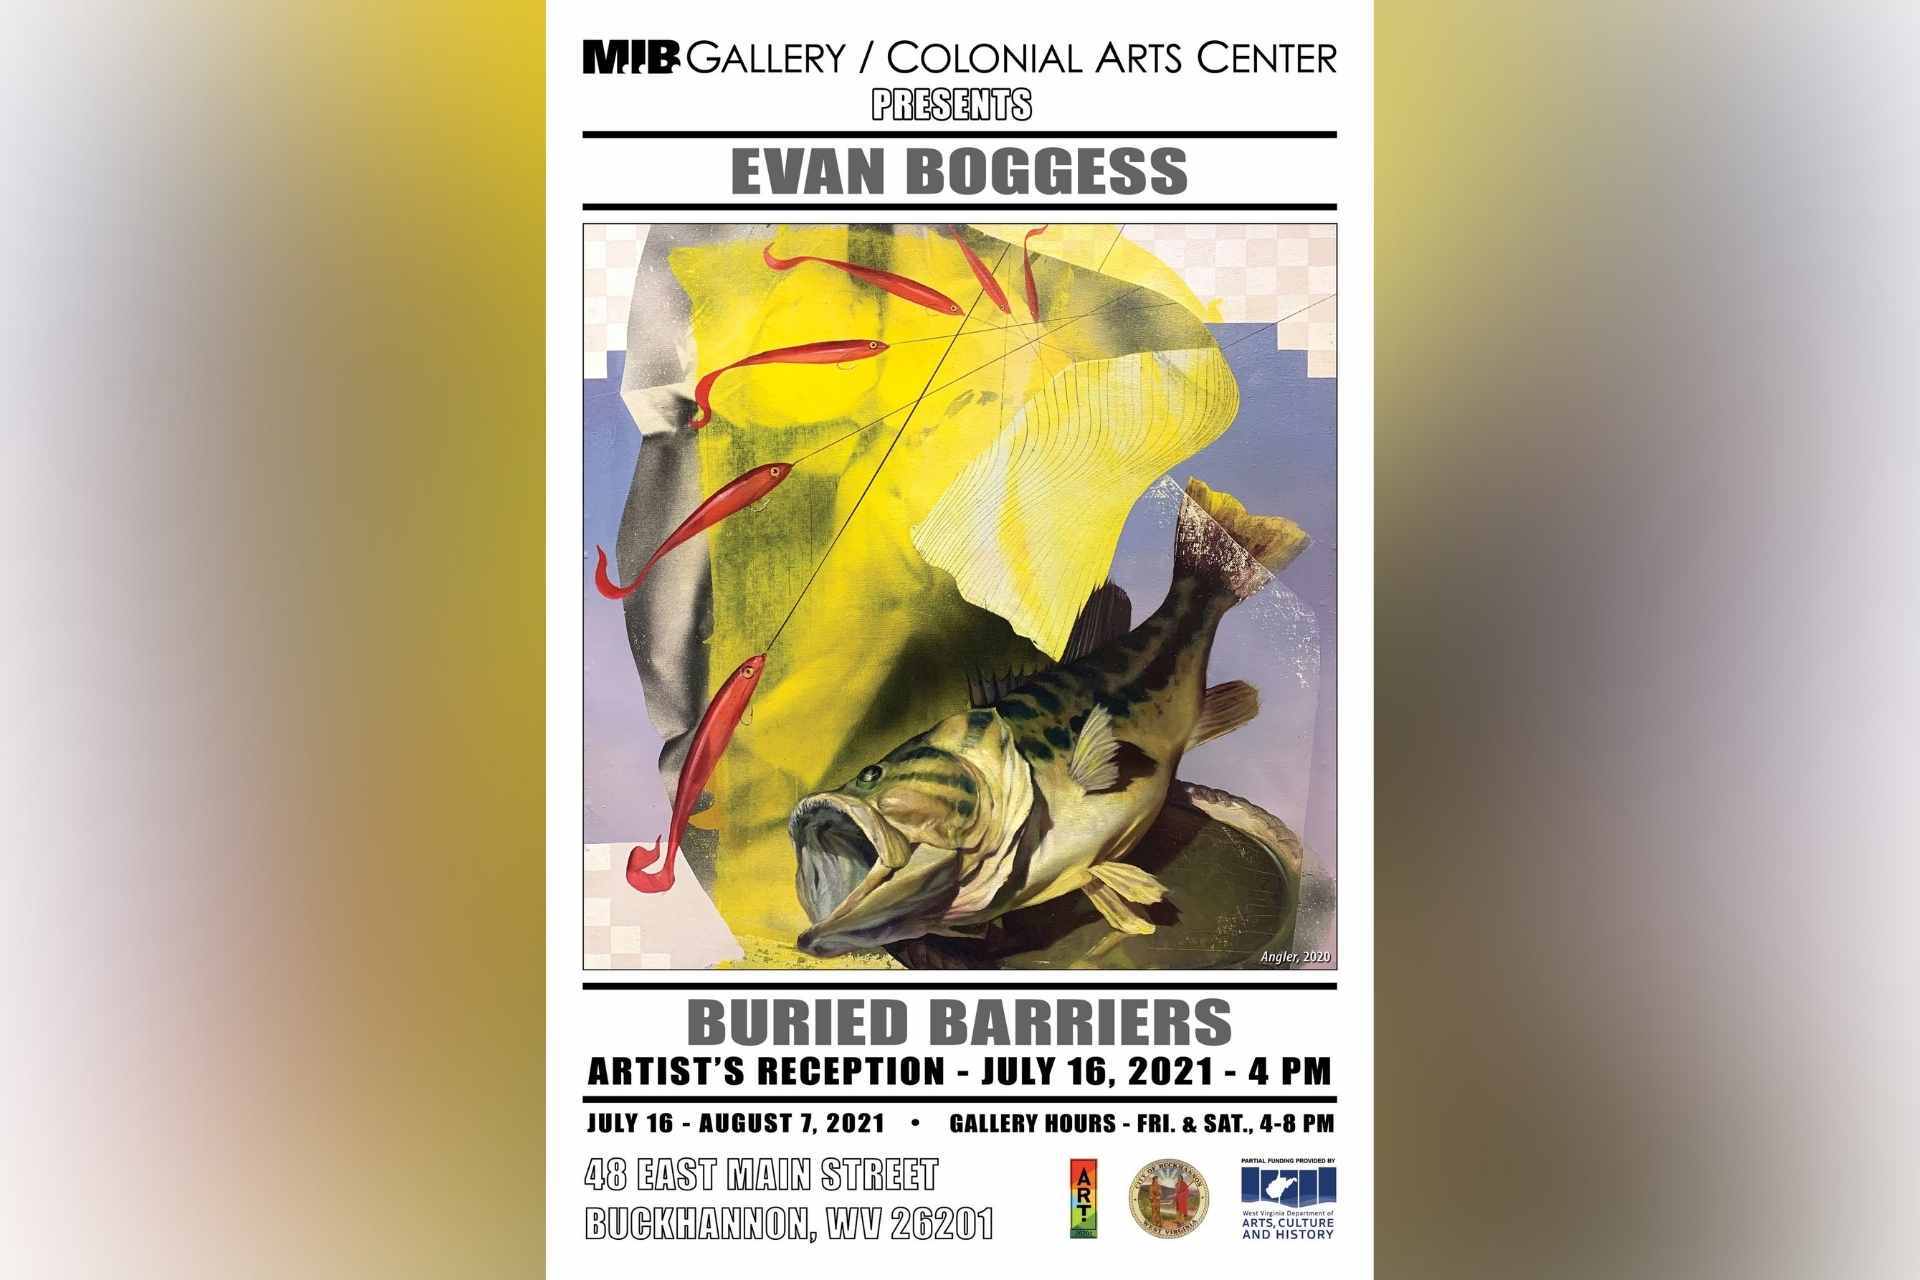 ART26201 to present 'Buried Barriers' exhibit by Evan Boggess at